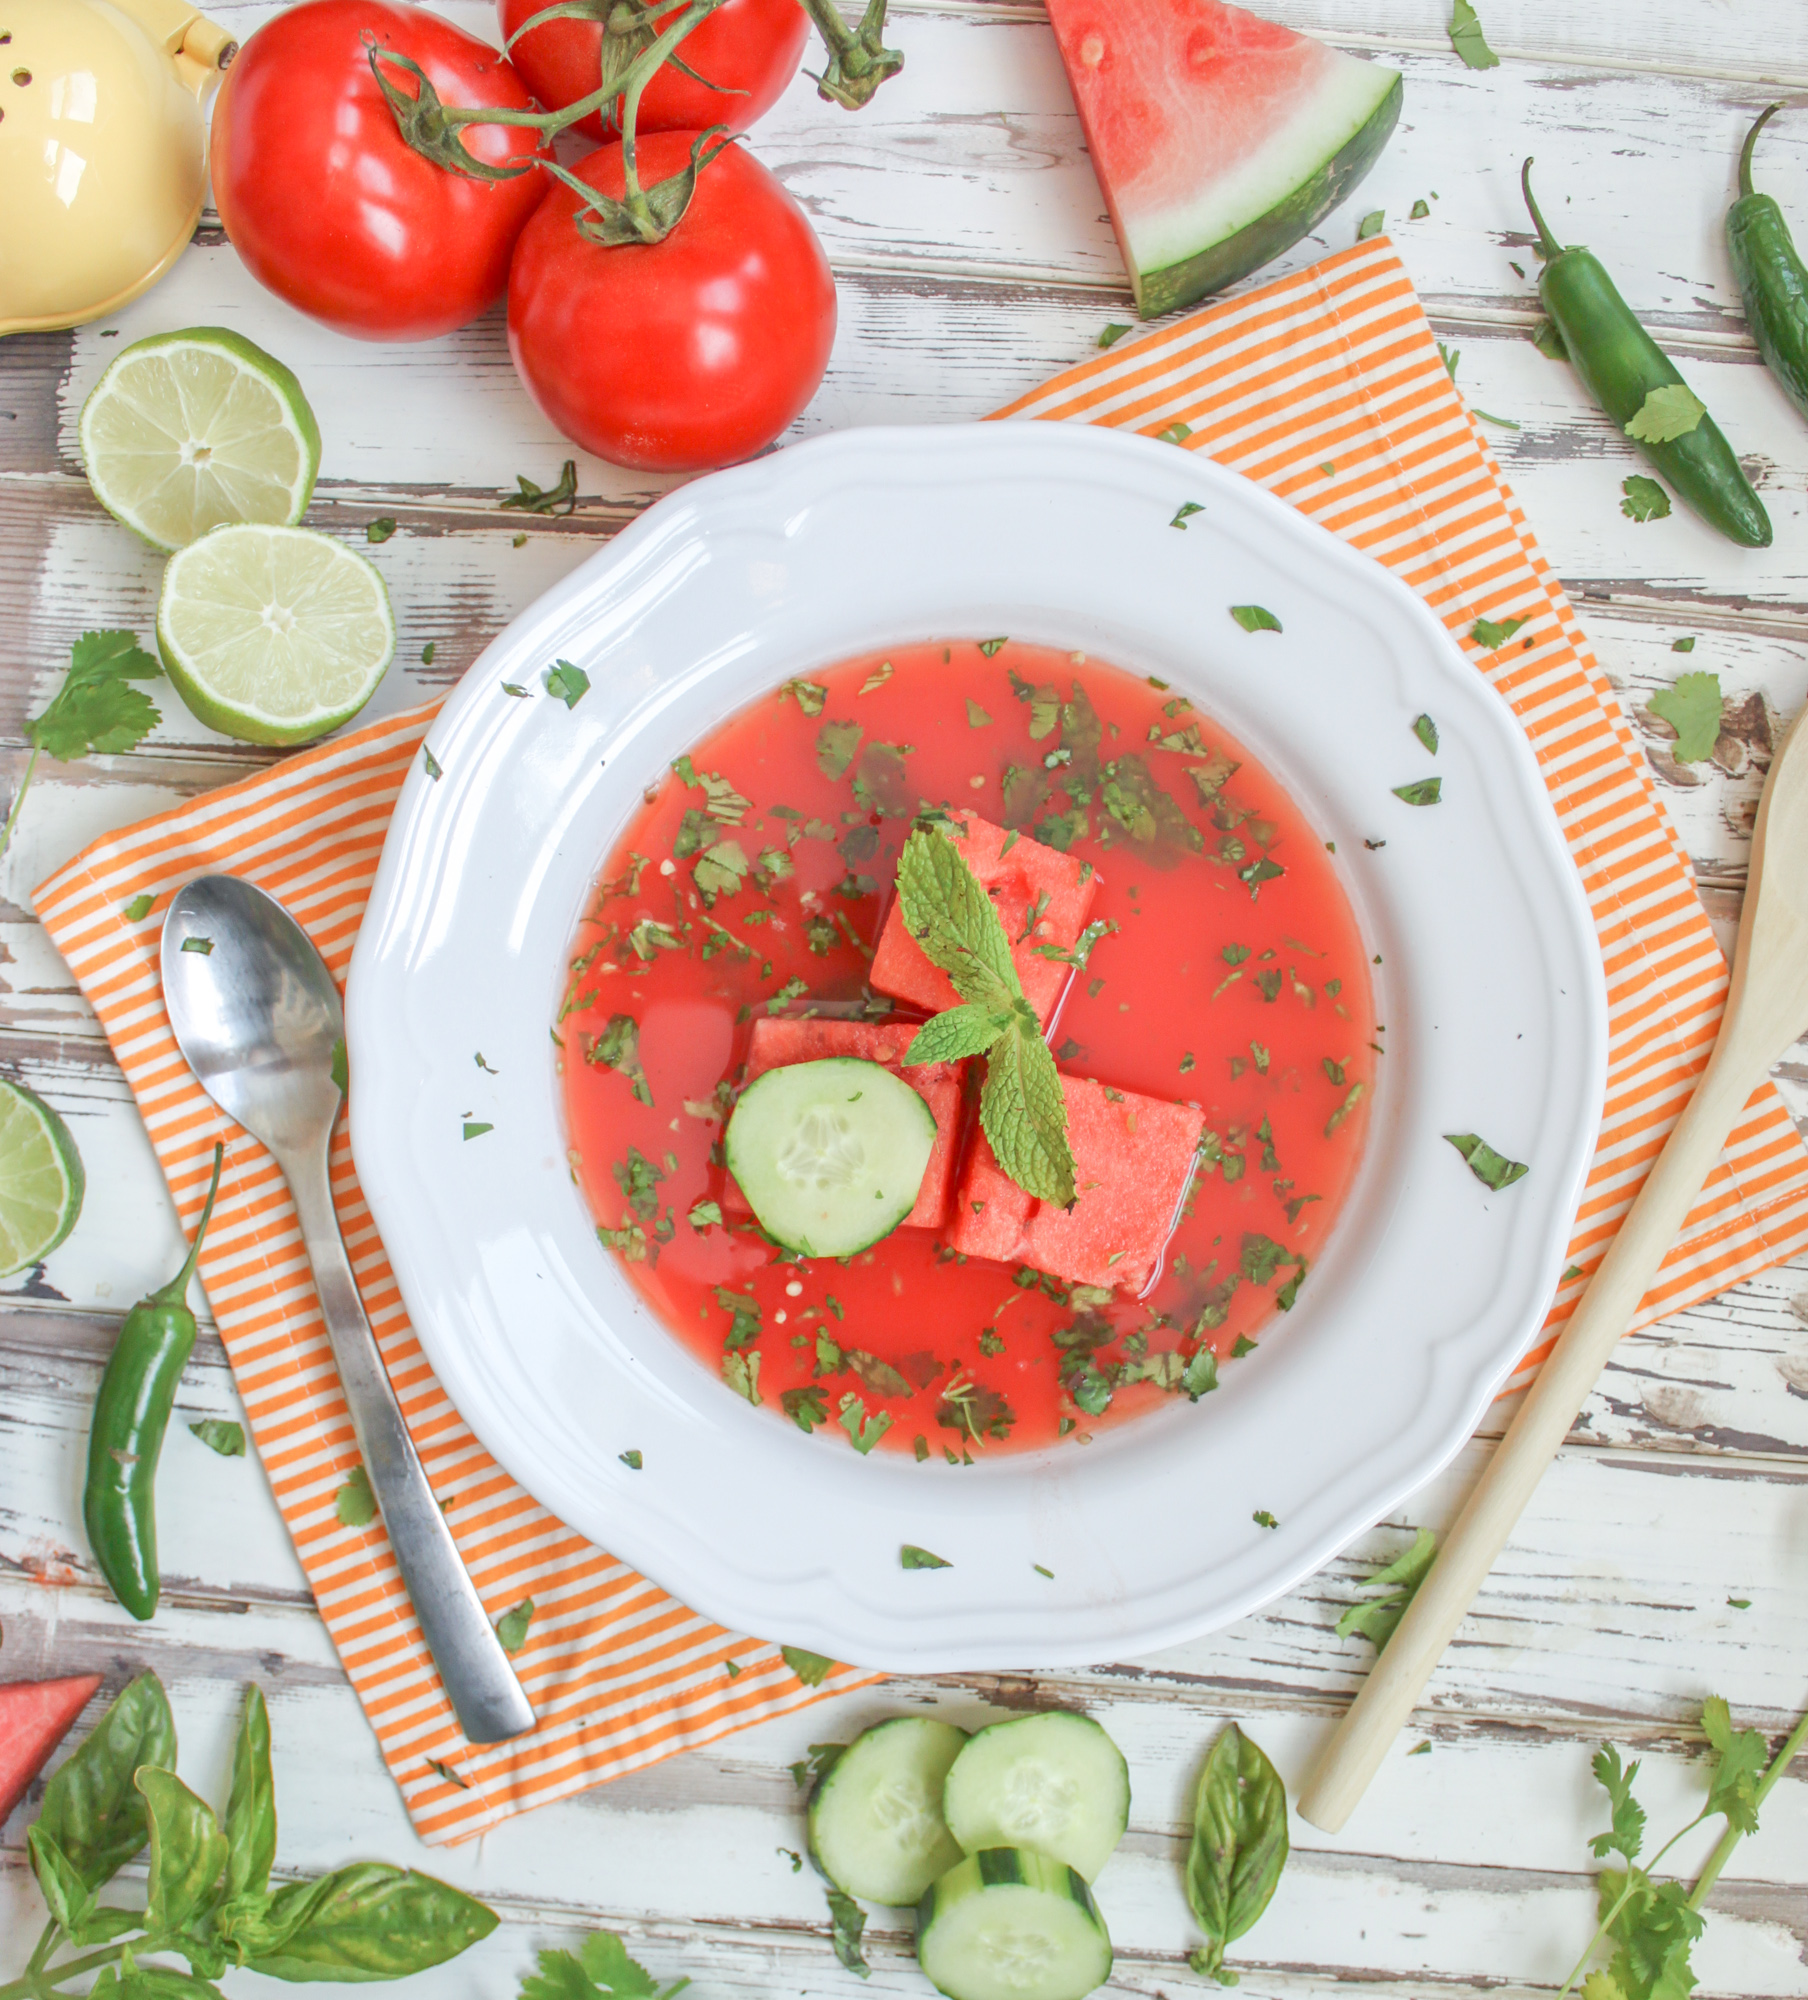 Spicy Watermelon Gazpacho Soup | Mouth-Watering Gazpacho Recipes You Won't Believe Are Healthy